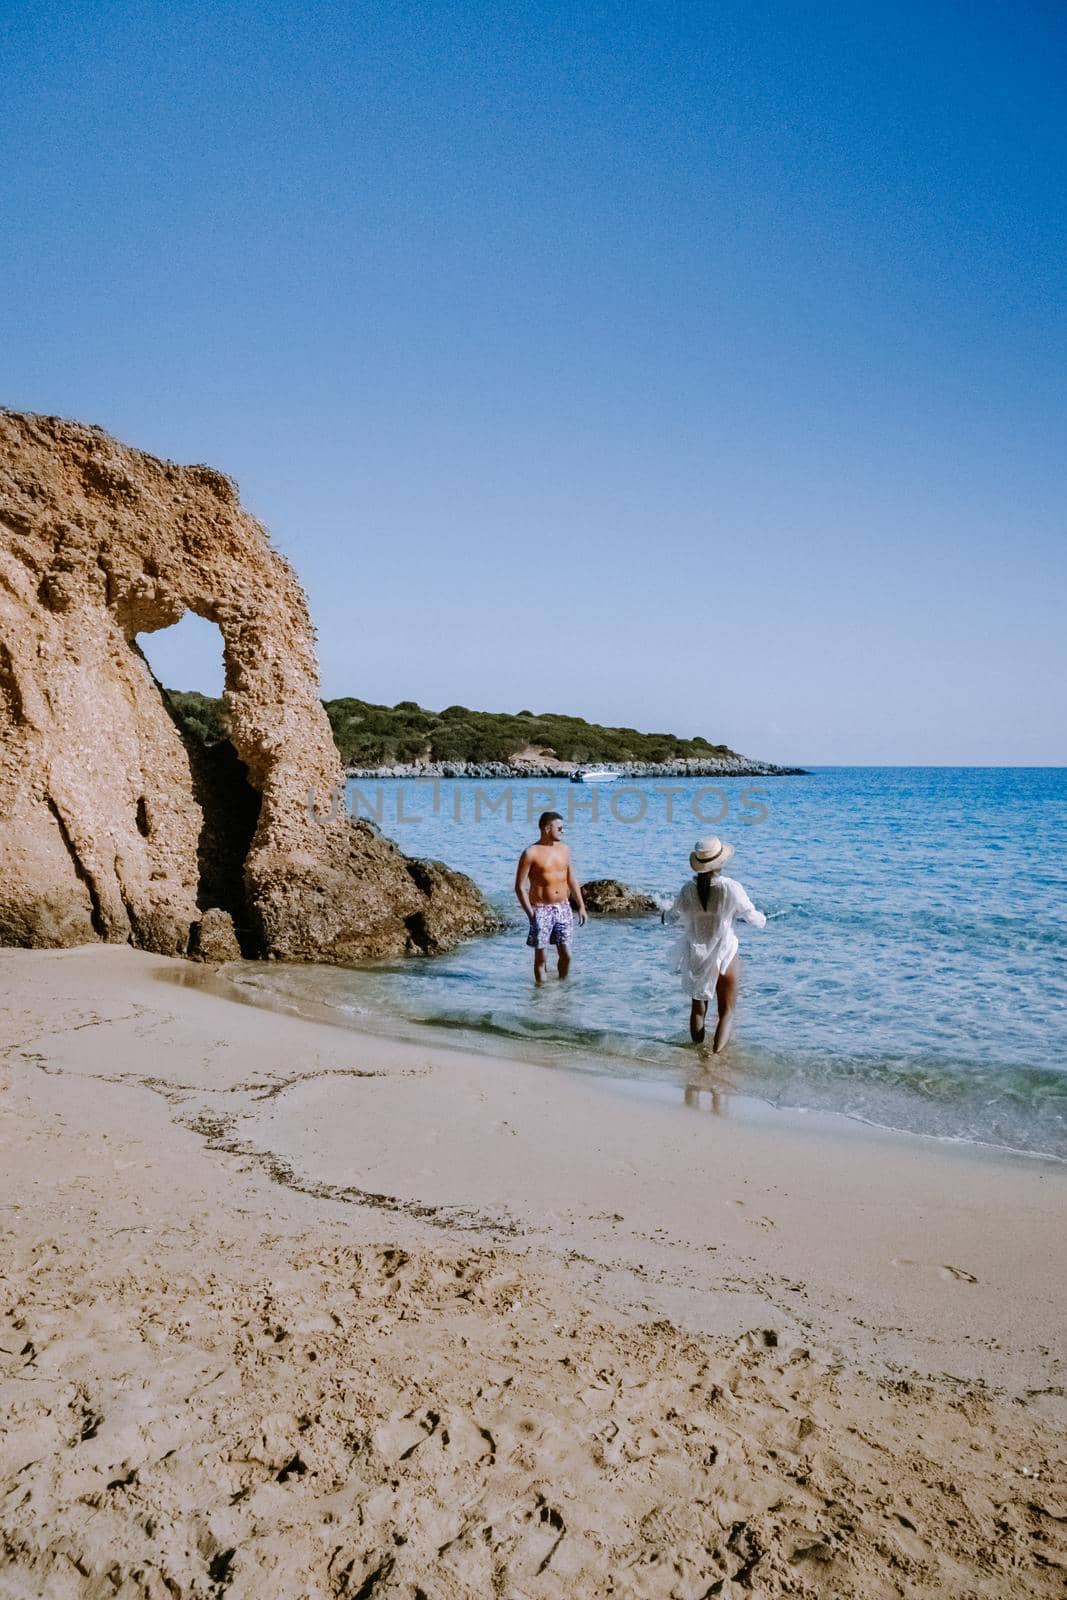 Tropical beach of Voulisma beach, Istron, Crete, Greece, couple on vacation in Greece by fokkebok